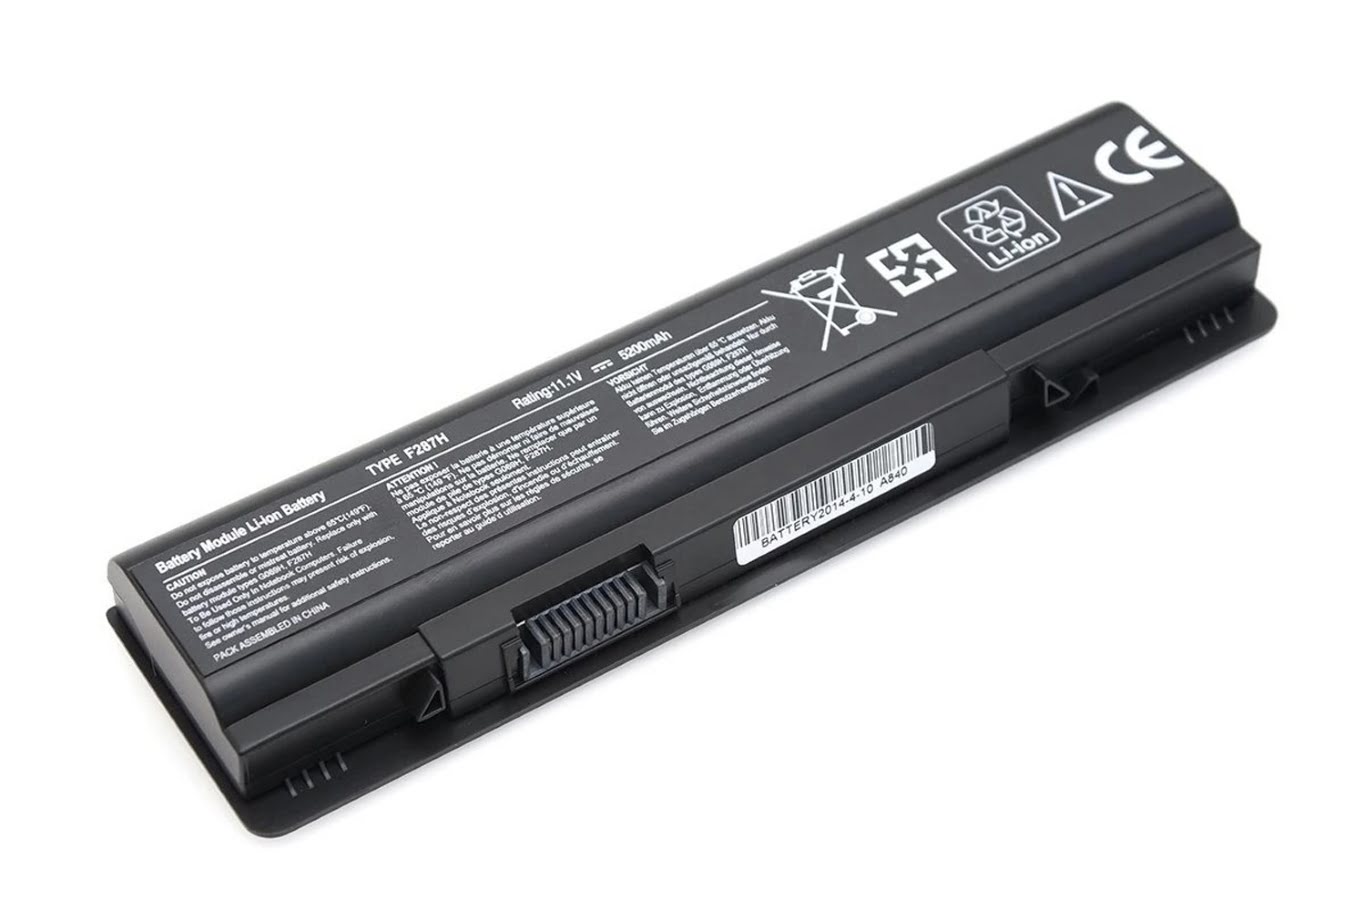 0F286H, 312-0818 replacement Laptop Battery for Dell Inspiron 1410, Vostro 1014, 11.1V, 48wh